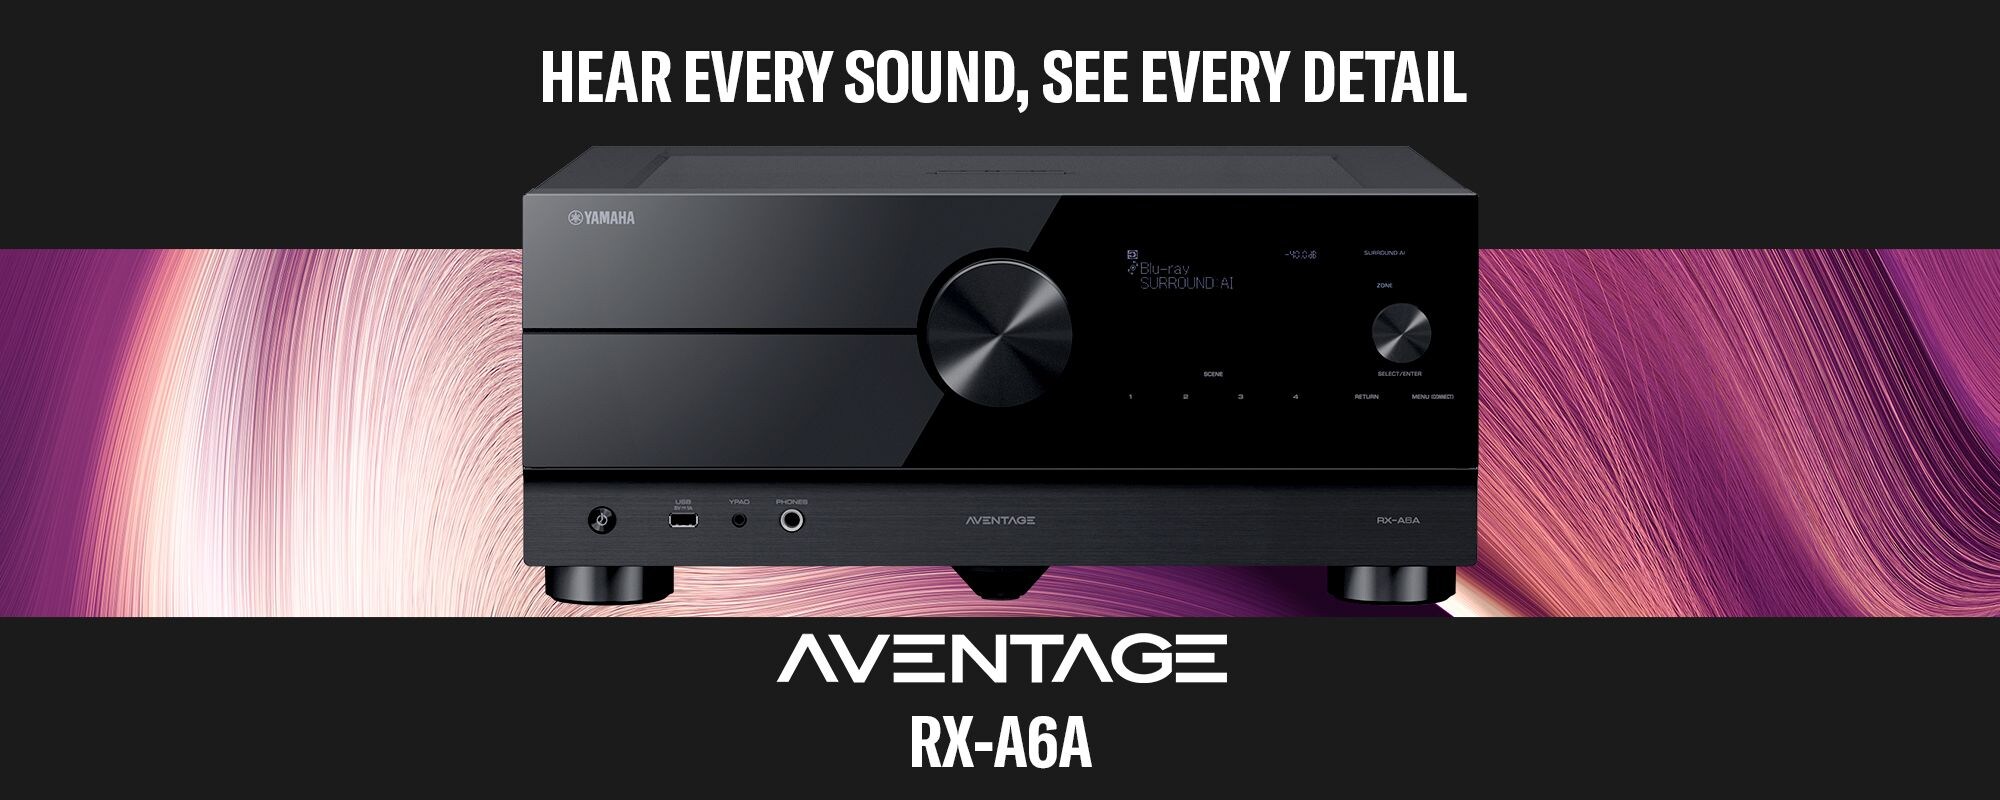 Hear Every Sound, See Every Detail - Yamaha AVENTAGE RX-A6A 9.2-Channel AV Receiver with 8K HDMI …